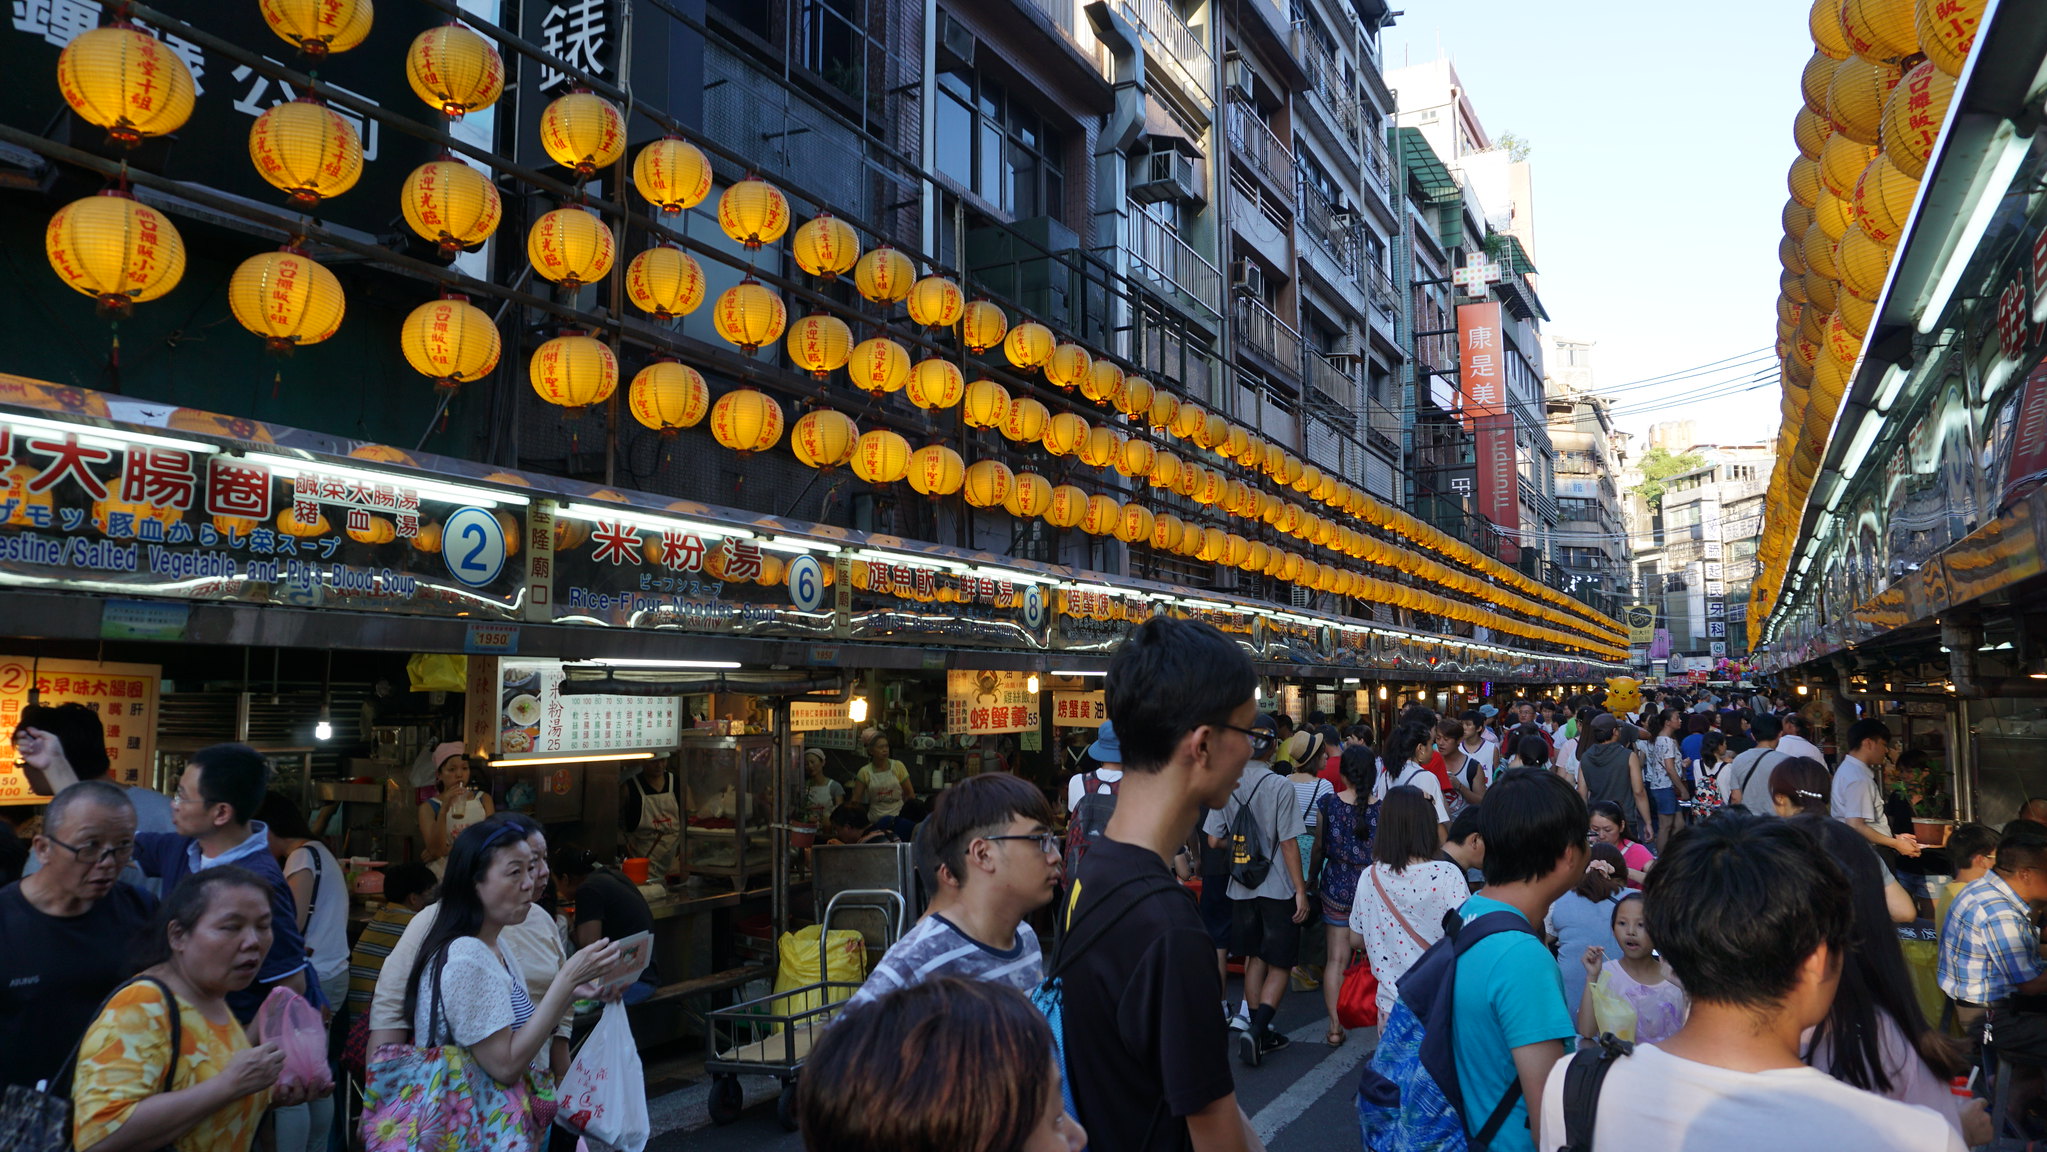 10 Best Taiwan Night Markets and Street Foods